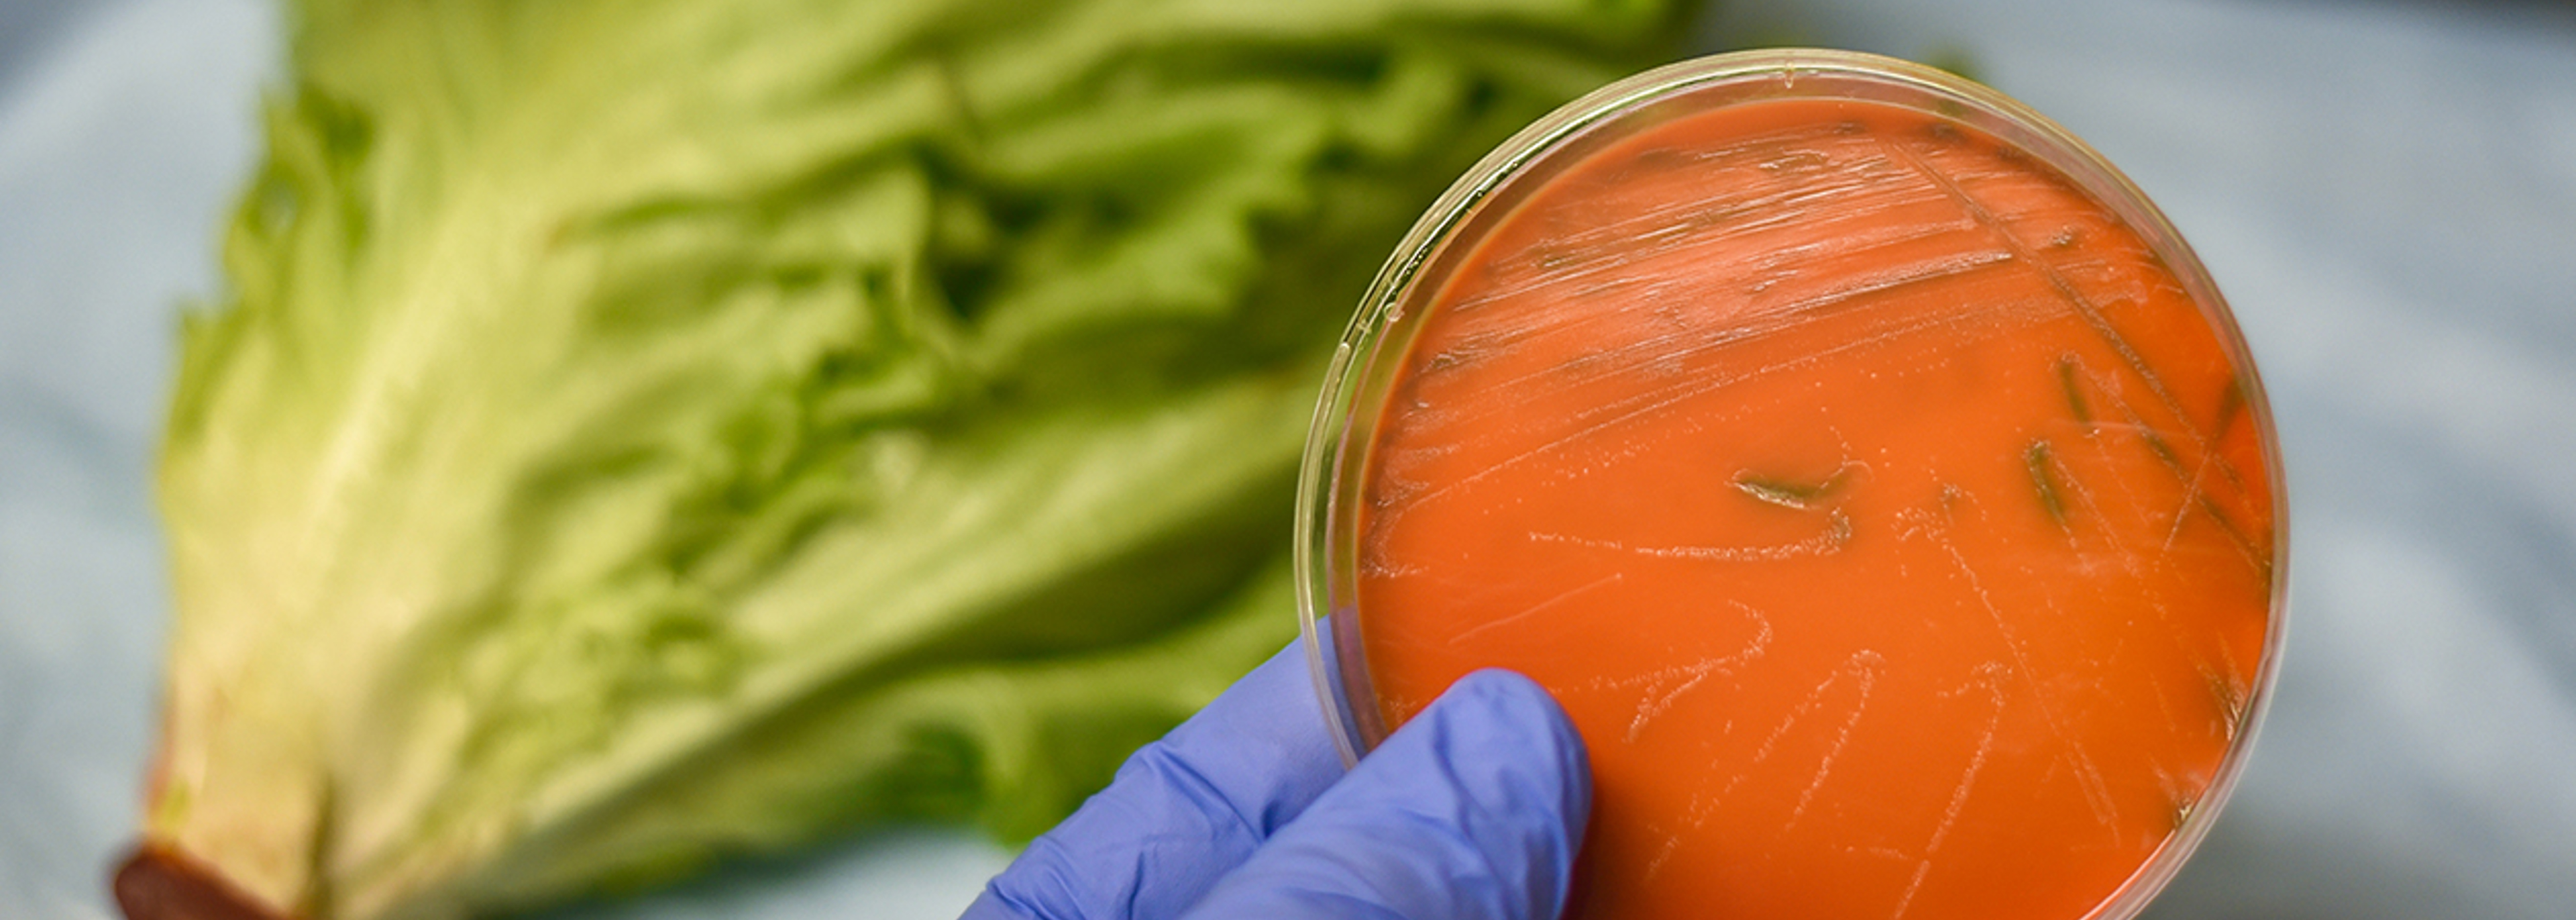 Listeria deaths result of ‘vulnerable public health situation’, says expert